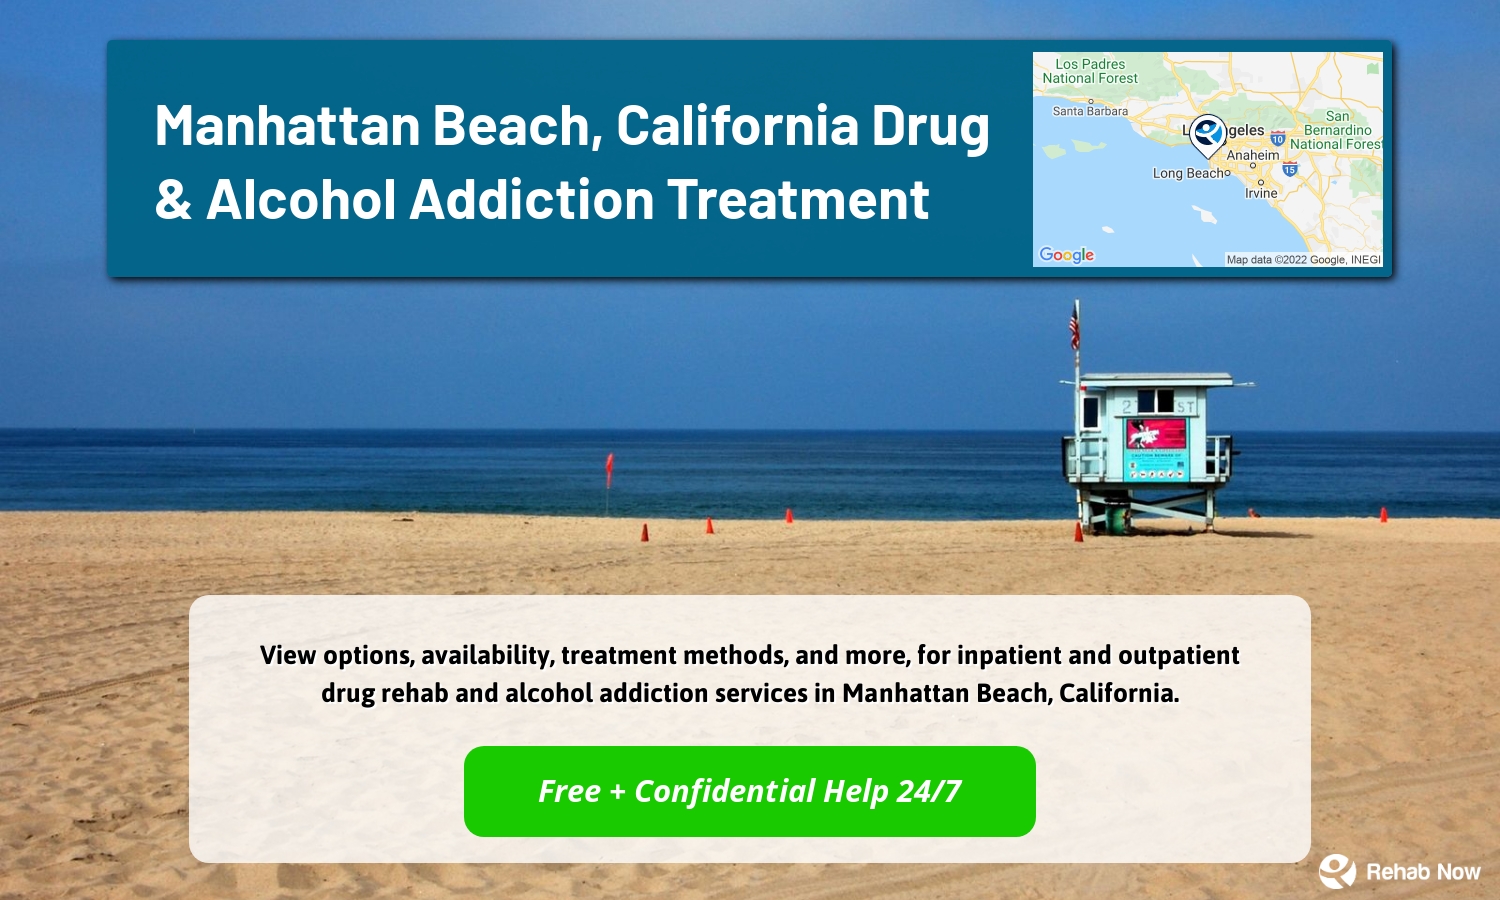 View options, availability, treatment methods, and more, for inpatient and outpatient drug rehab and alcohol addiction services in Manhattan Beach, California.